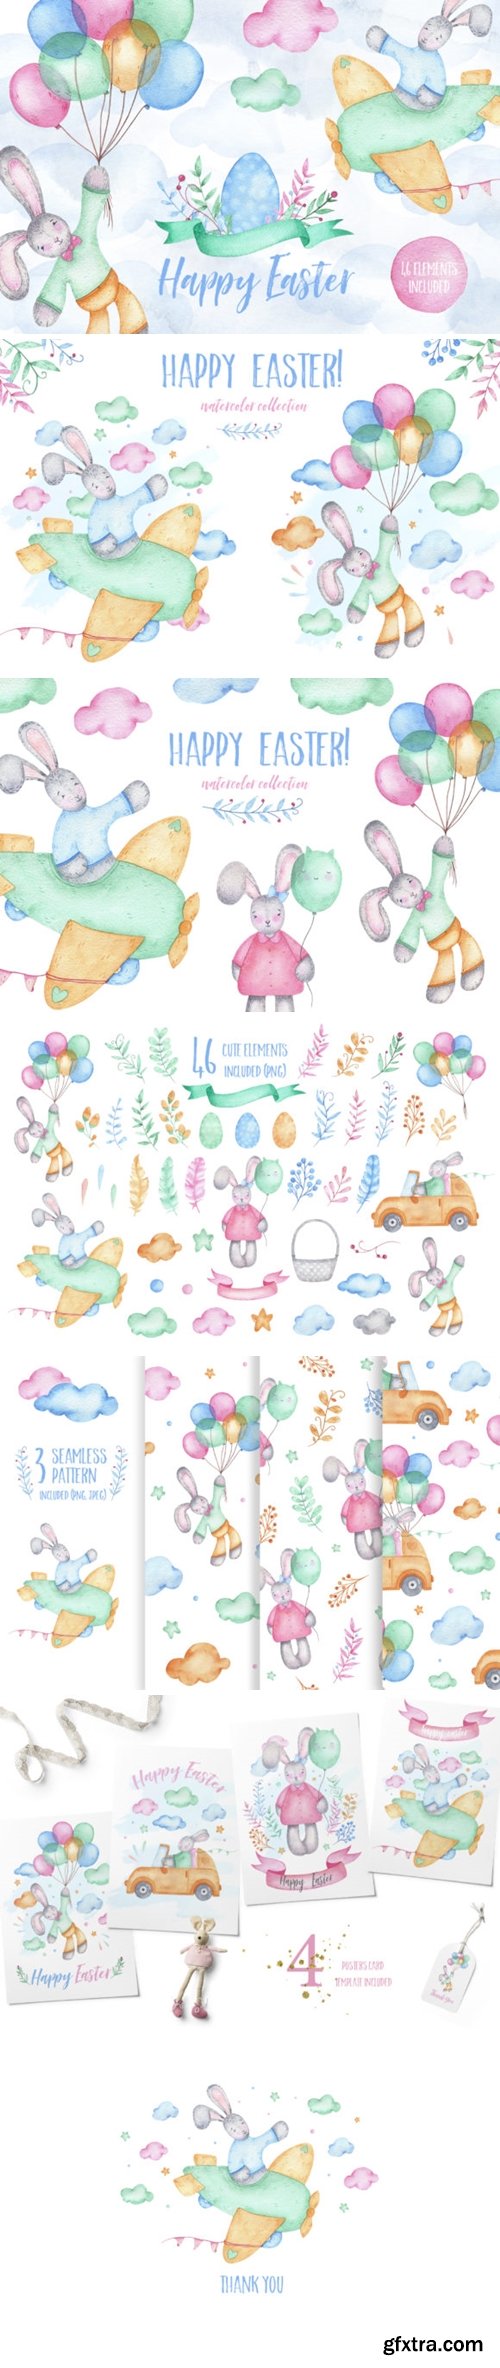 Happy Easter - Watercolor Clipart 2194126